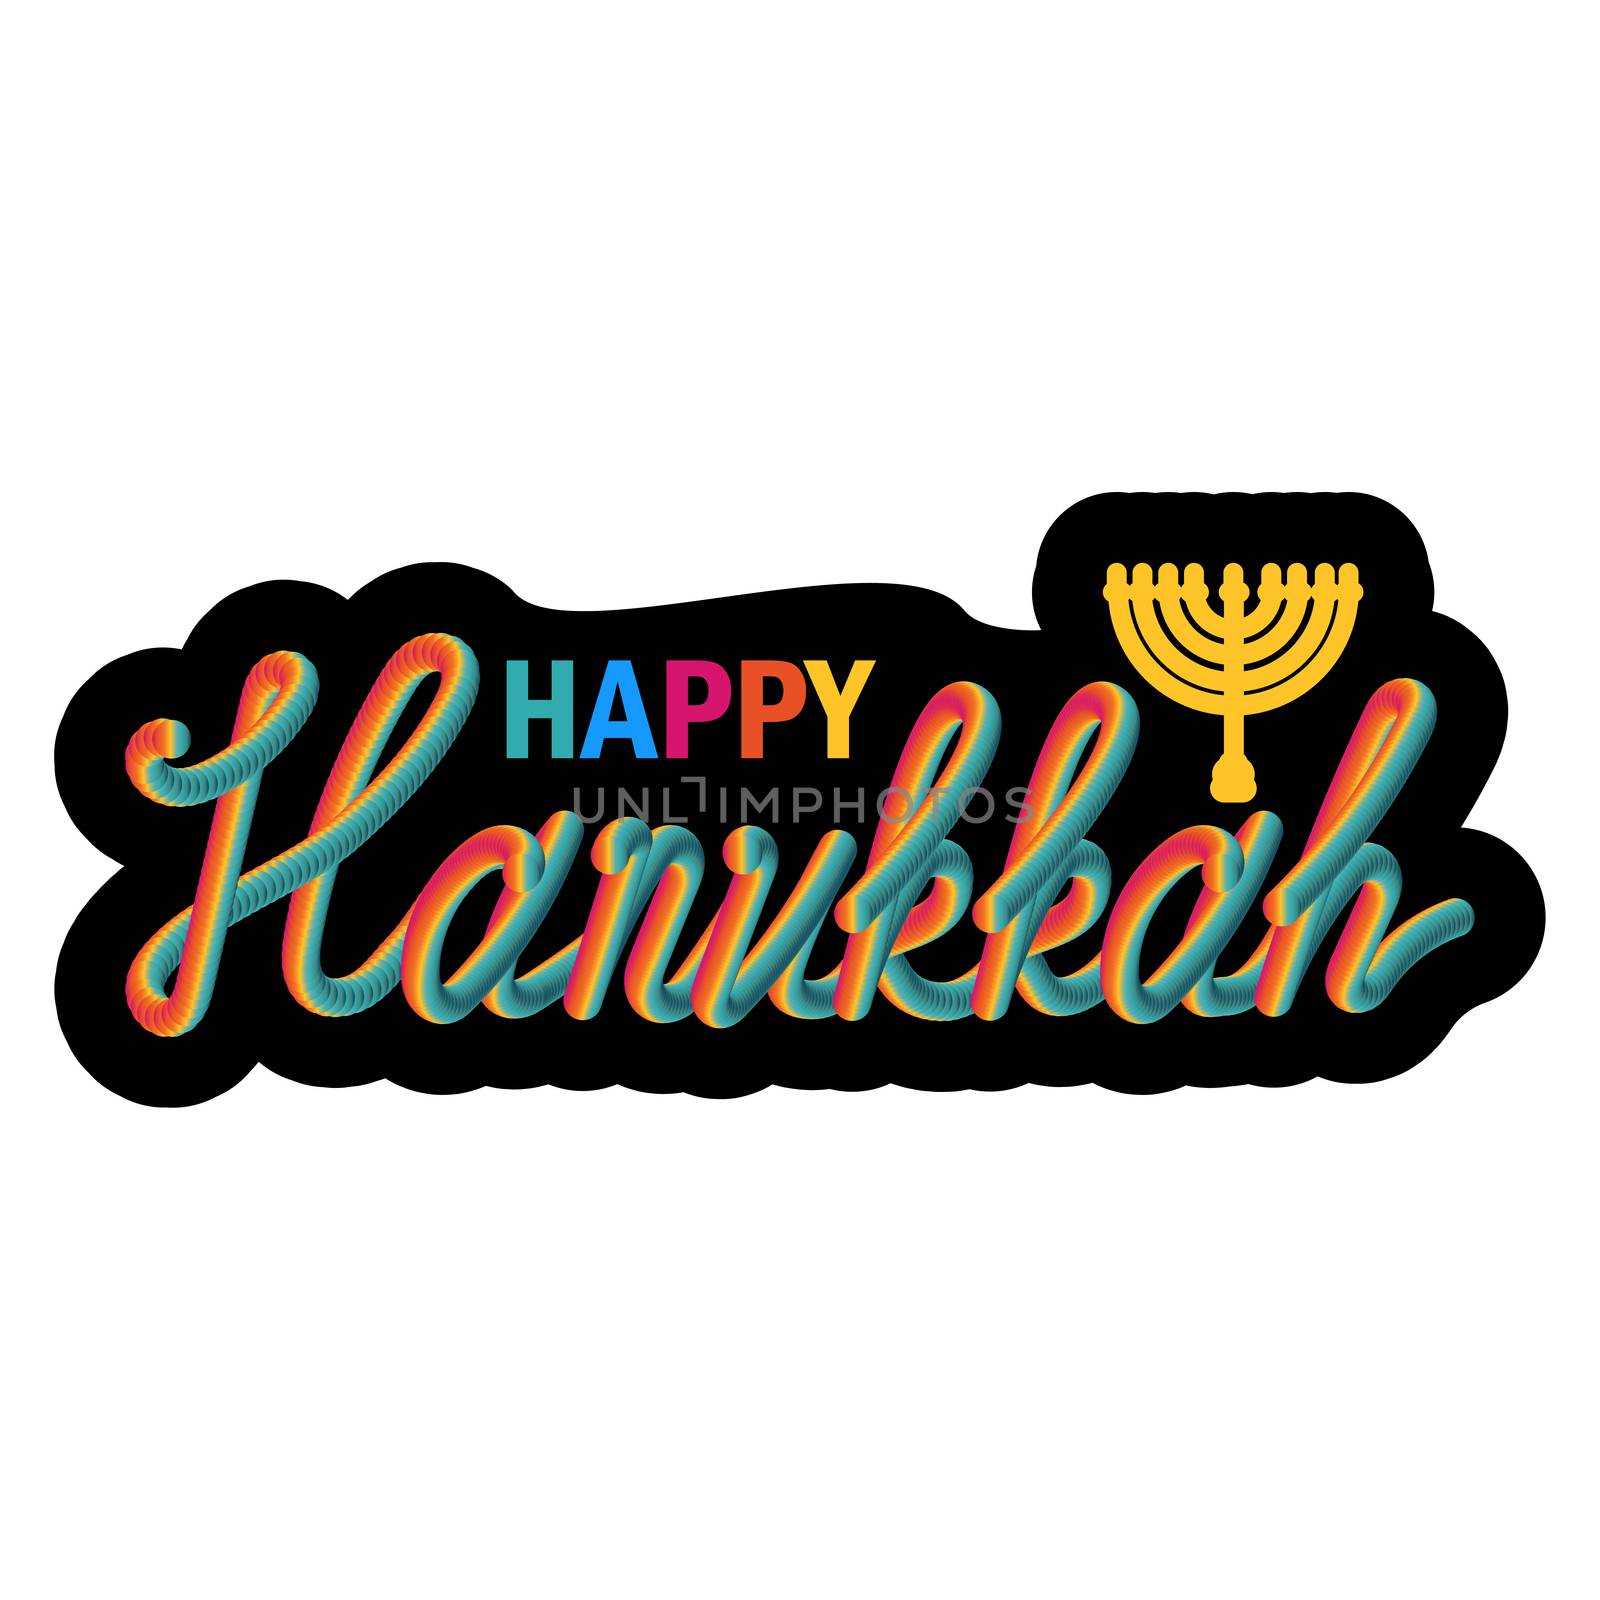 Hanukkah Greeting Banner With 3D Lettering Text. Vector